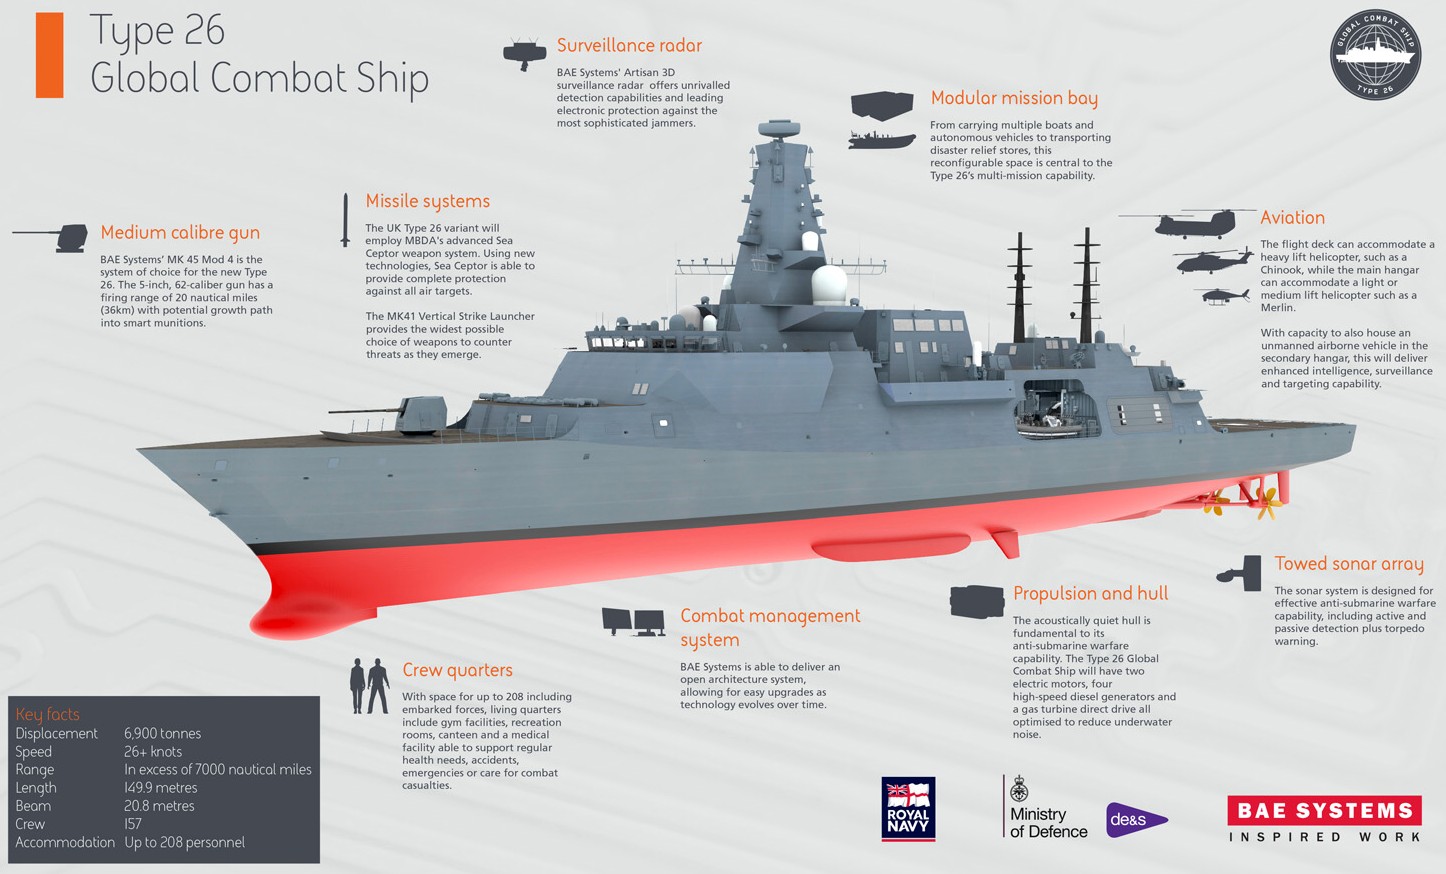 type 26 city class multi-mission frigate ffg global combat ship royal navy 07 info graphic